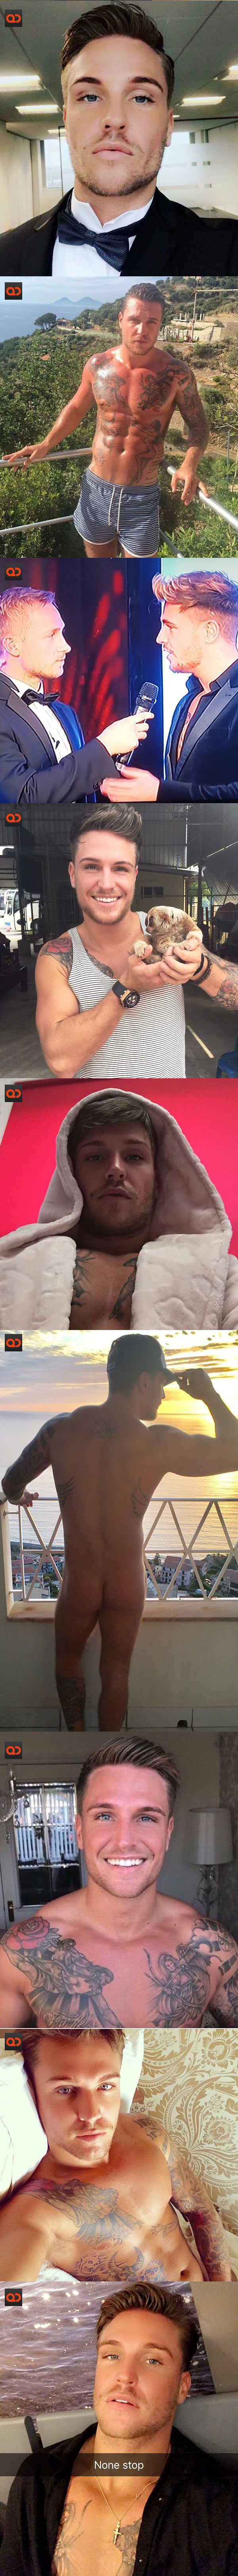 Tom Zanetti, British Singer, Totally Naked - Cock Exposed In Leaked Snaps!